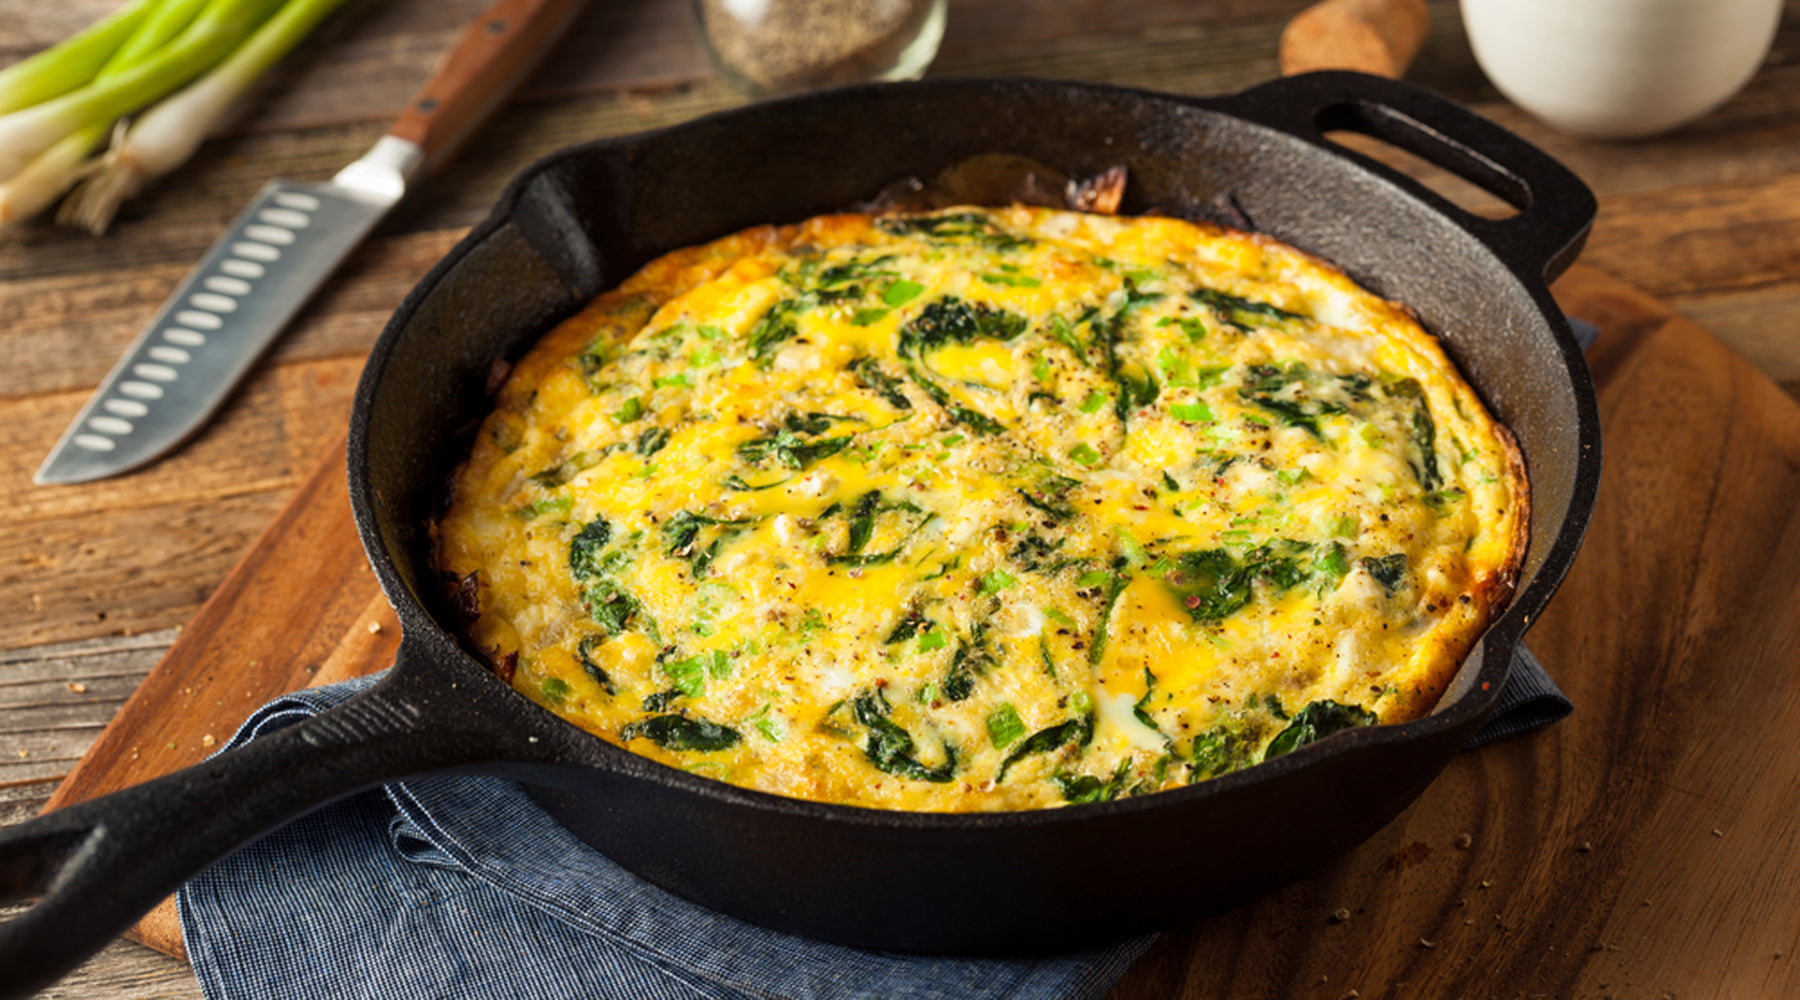 Feta Cheese Omelette with Spinach - Kosterina